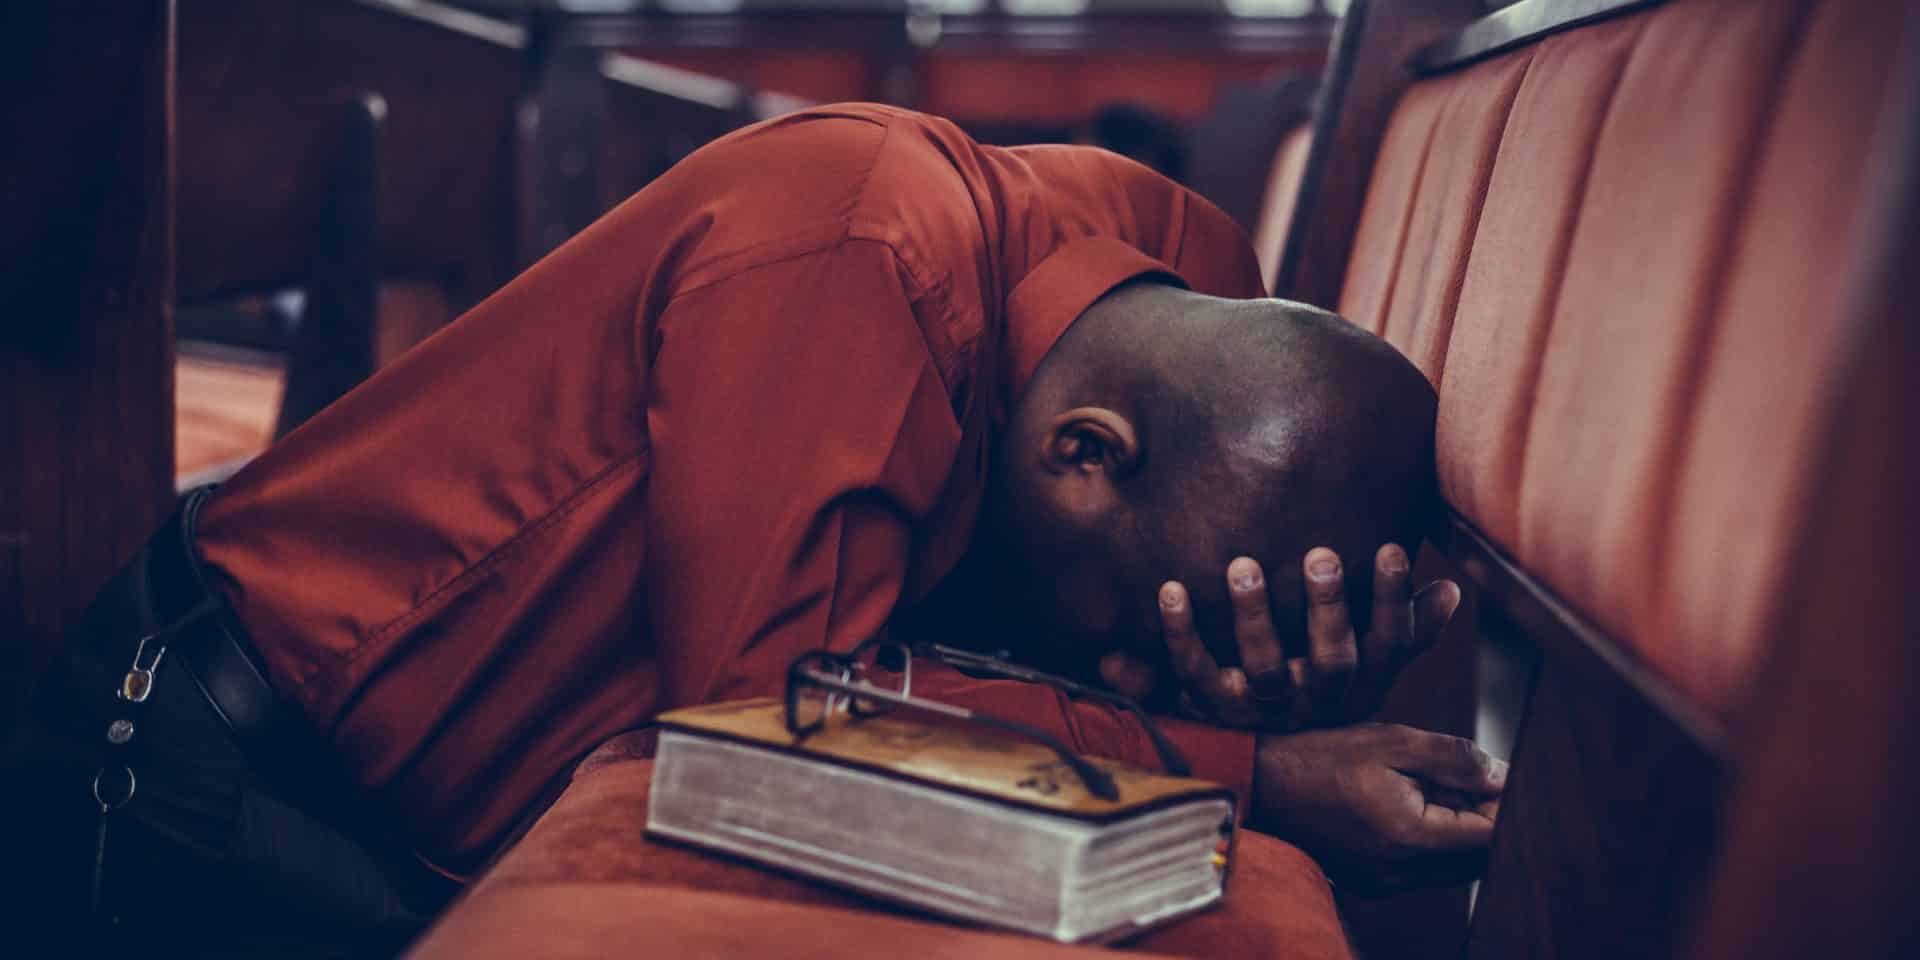 Man praying with his head in his hand...